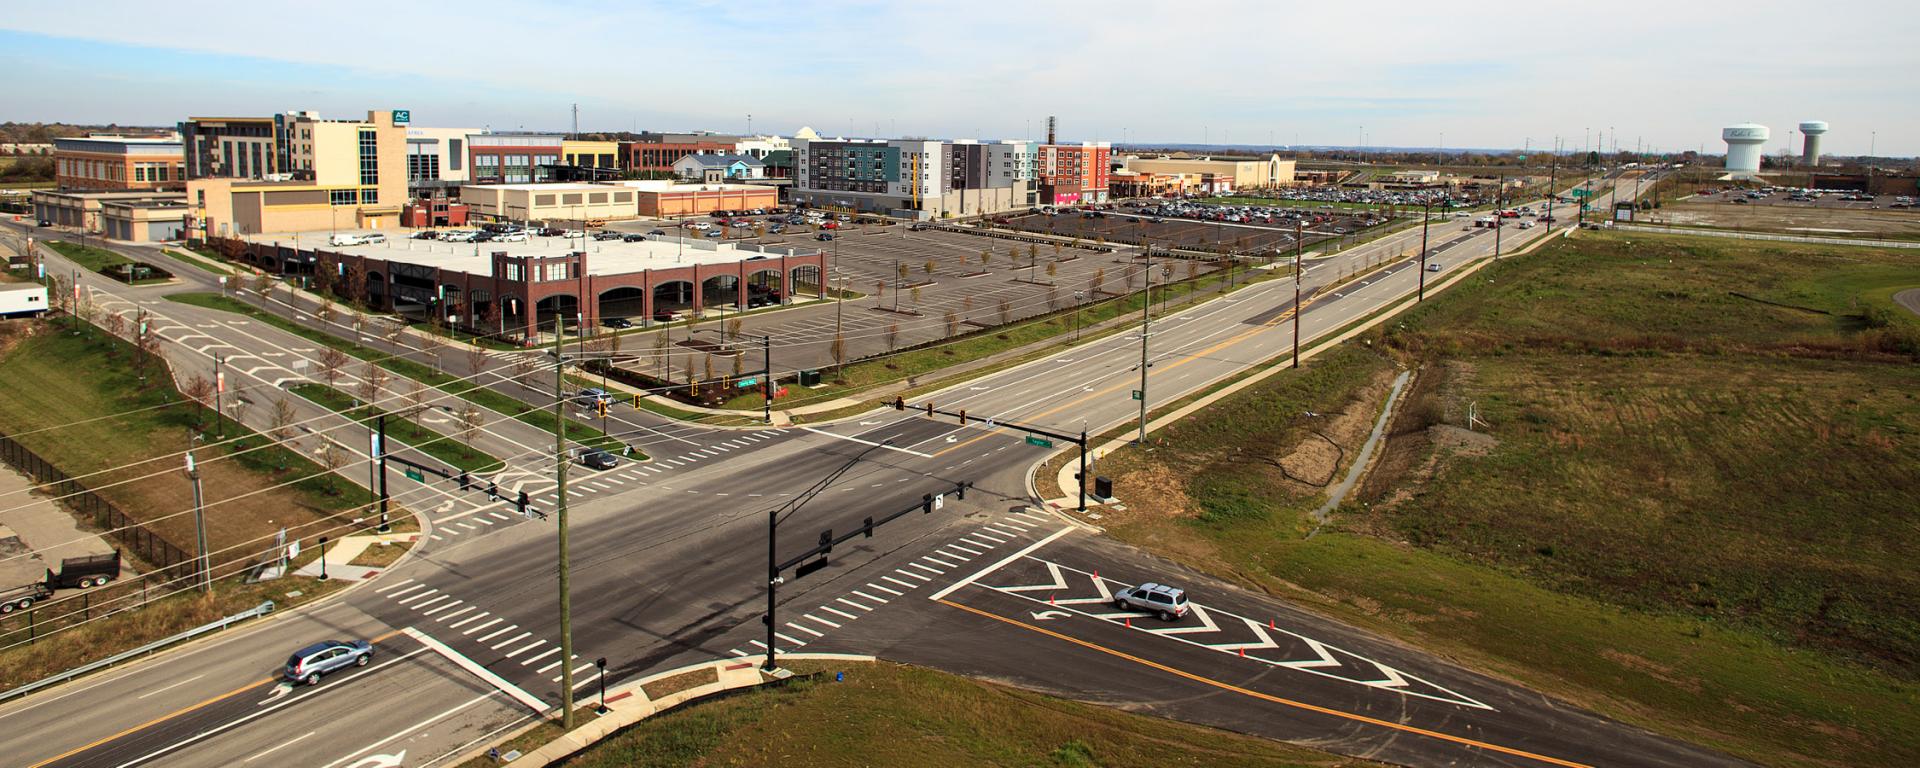 aerial photo of roadway and mixed use development